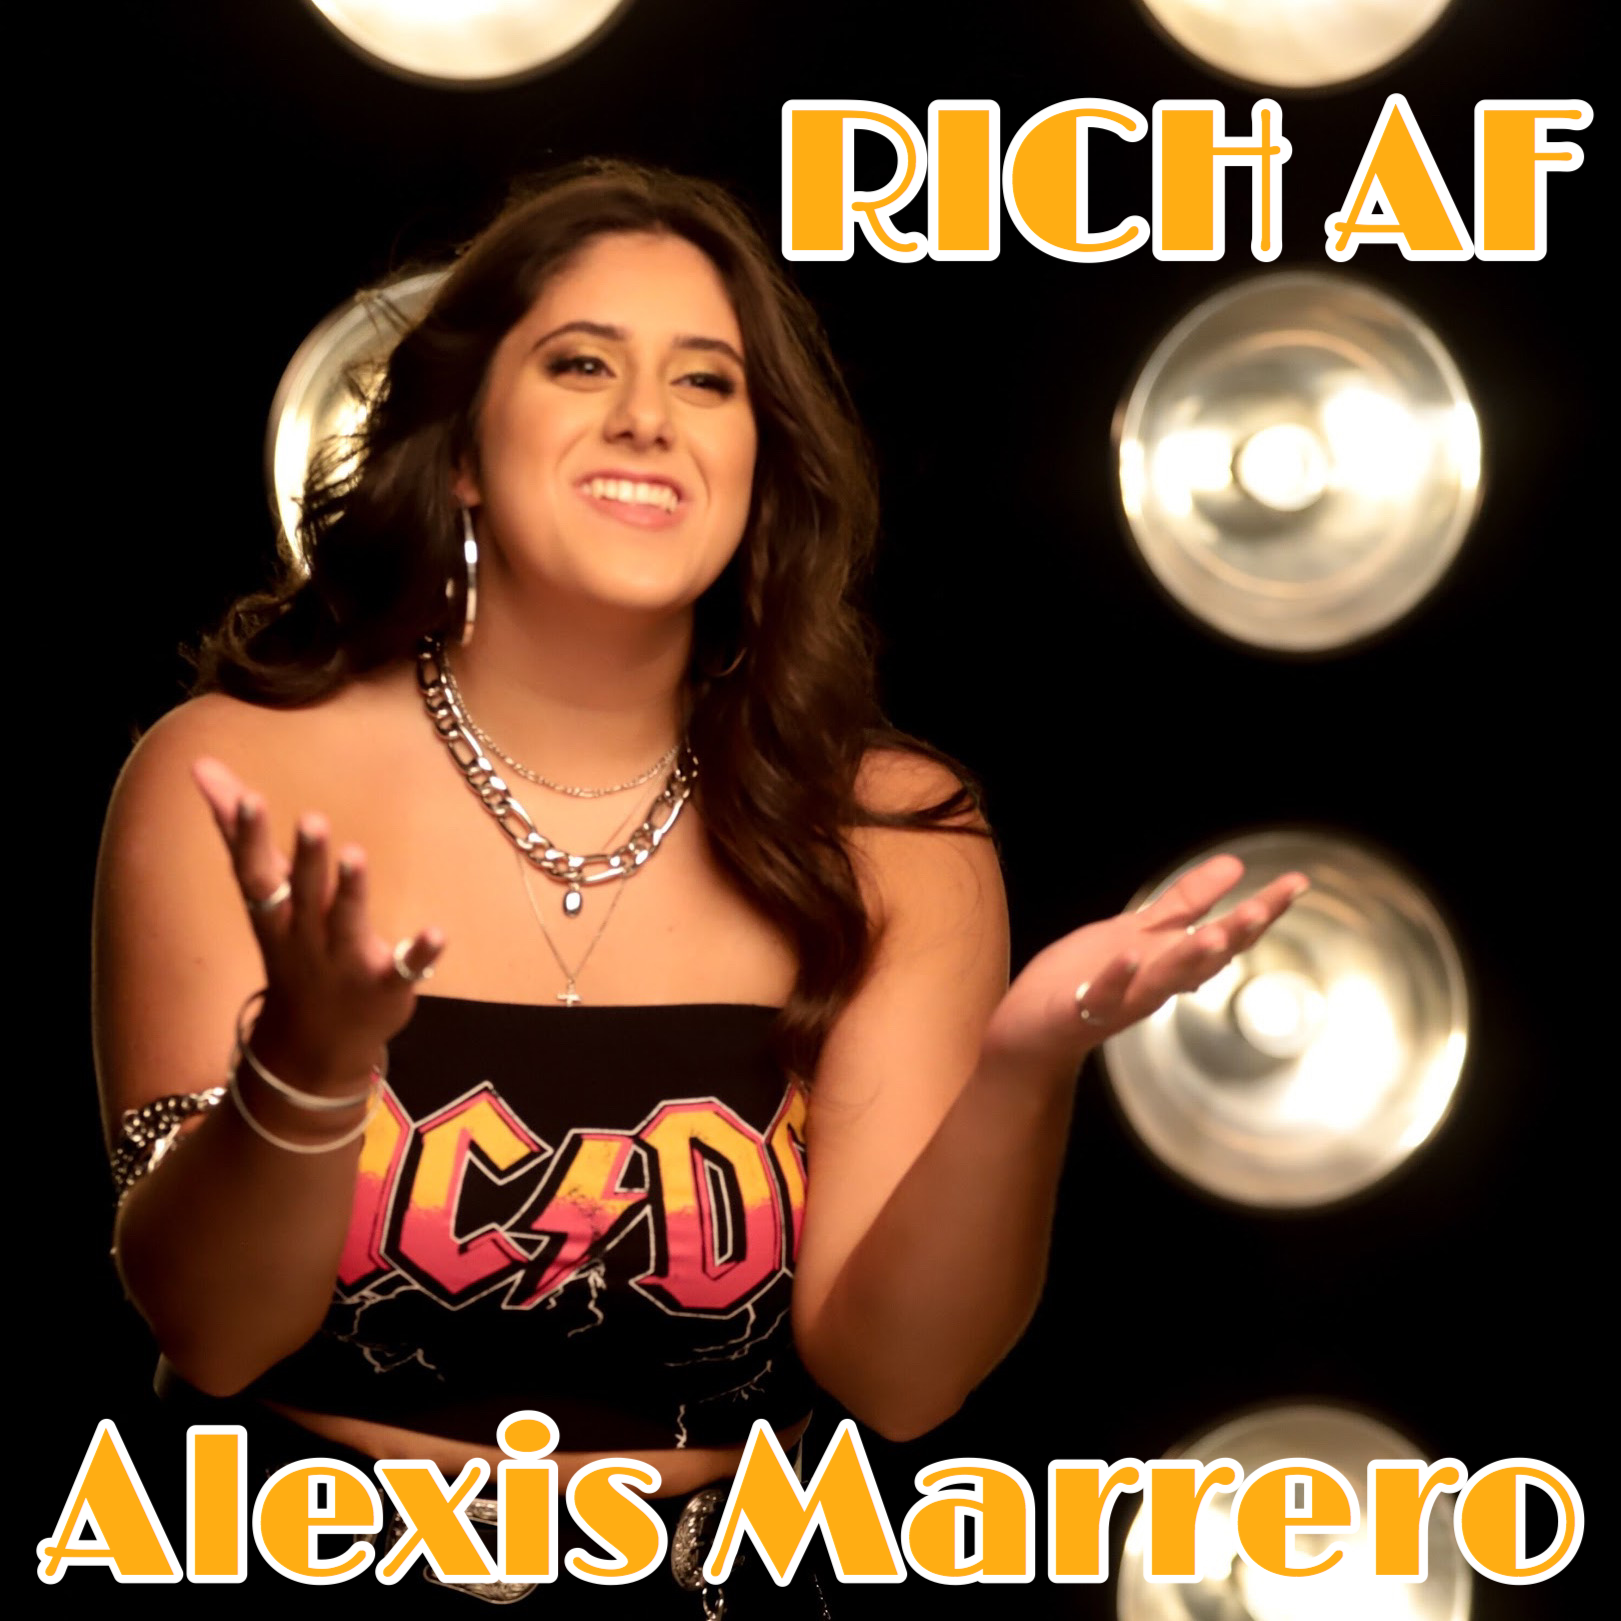 Art for Alexis Marrero by Rich AF